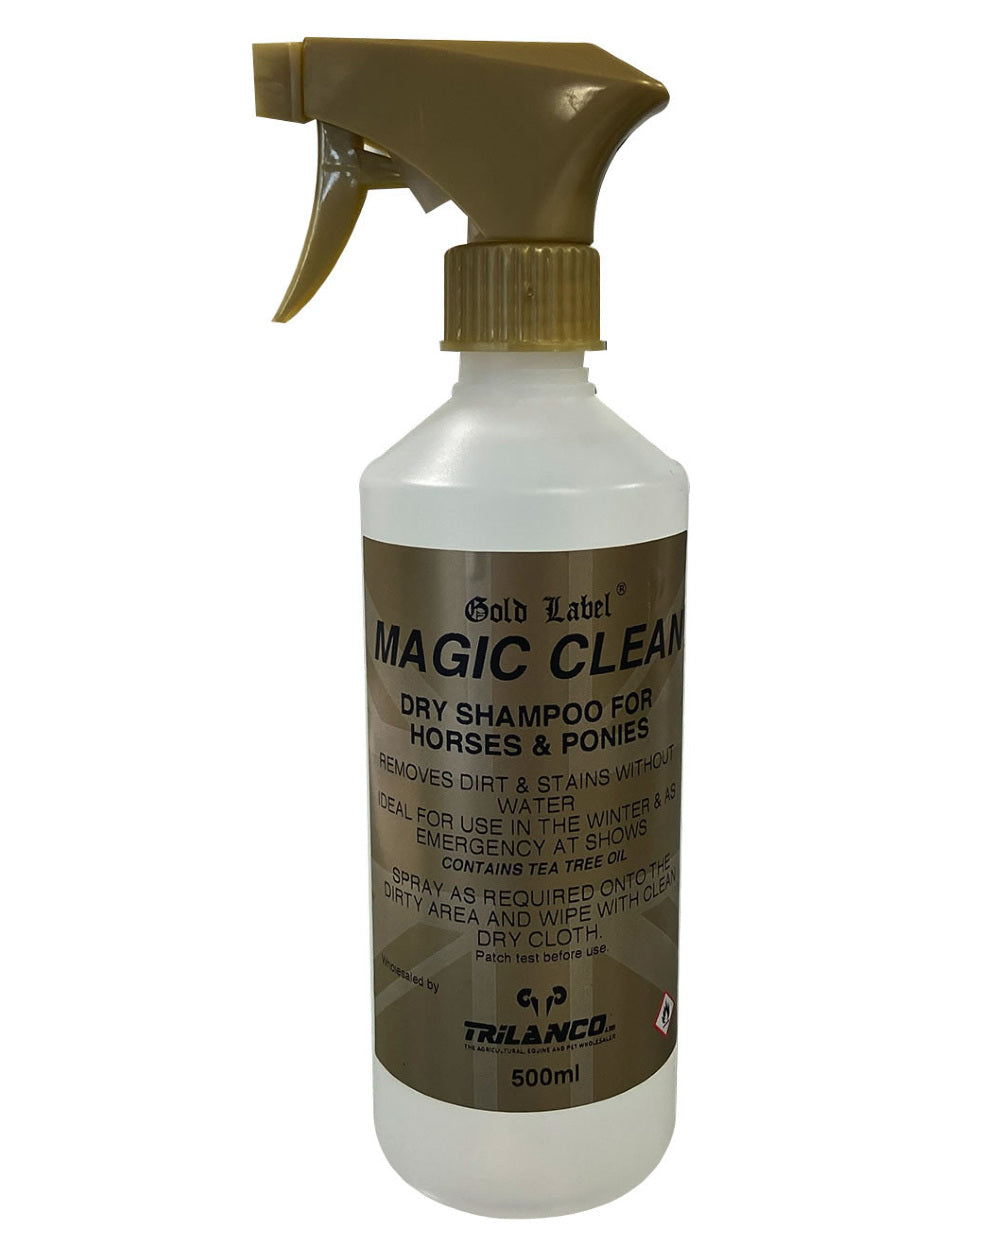 Gold Label Magic Clean On A White Background